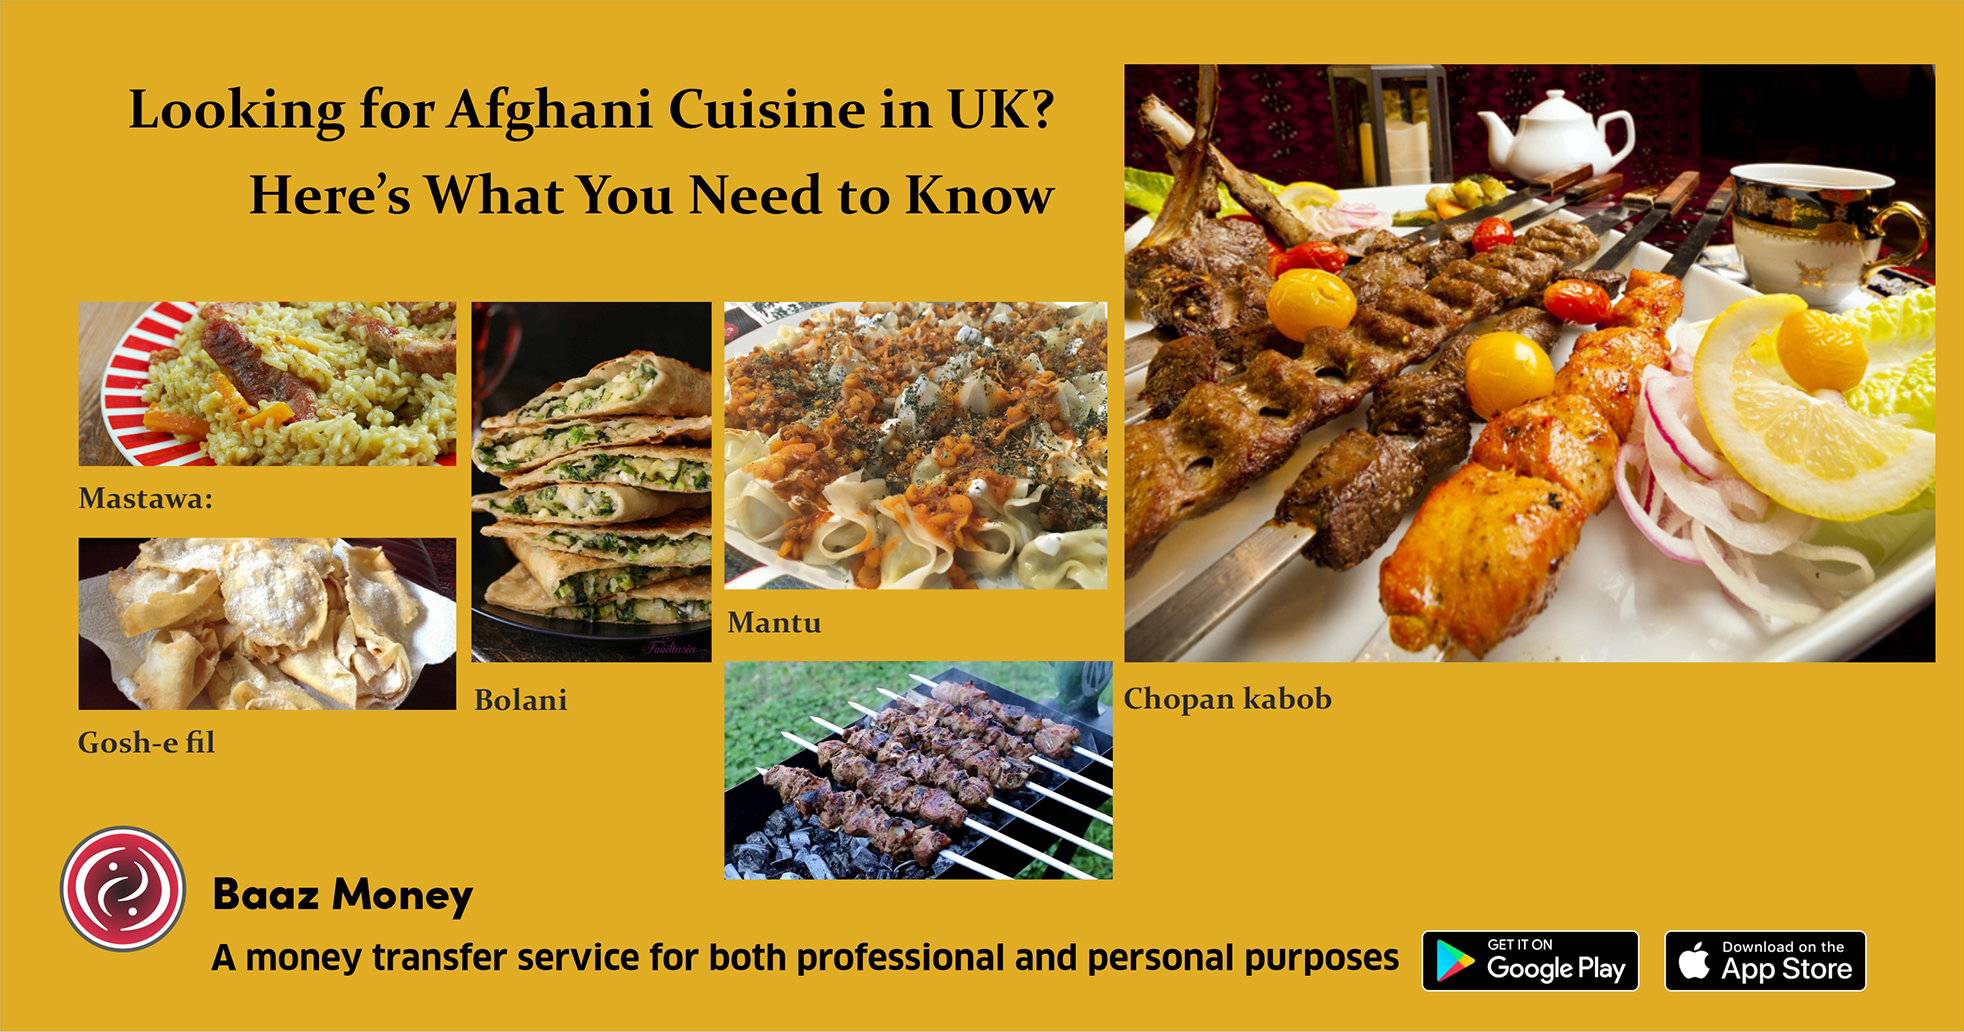 Looking for Afghani Cuisine in UK? - Here’s What You Need to Know